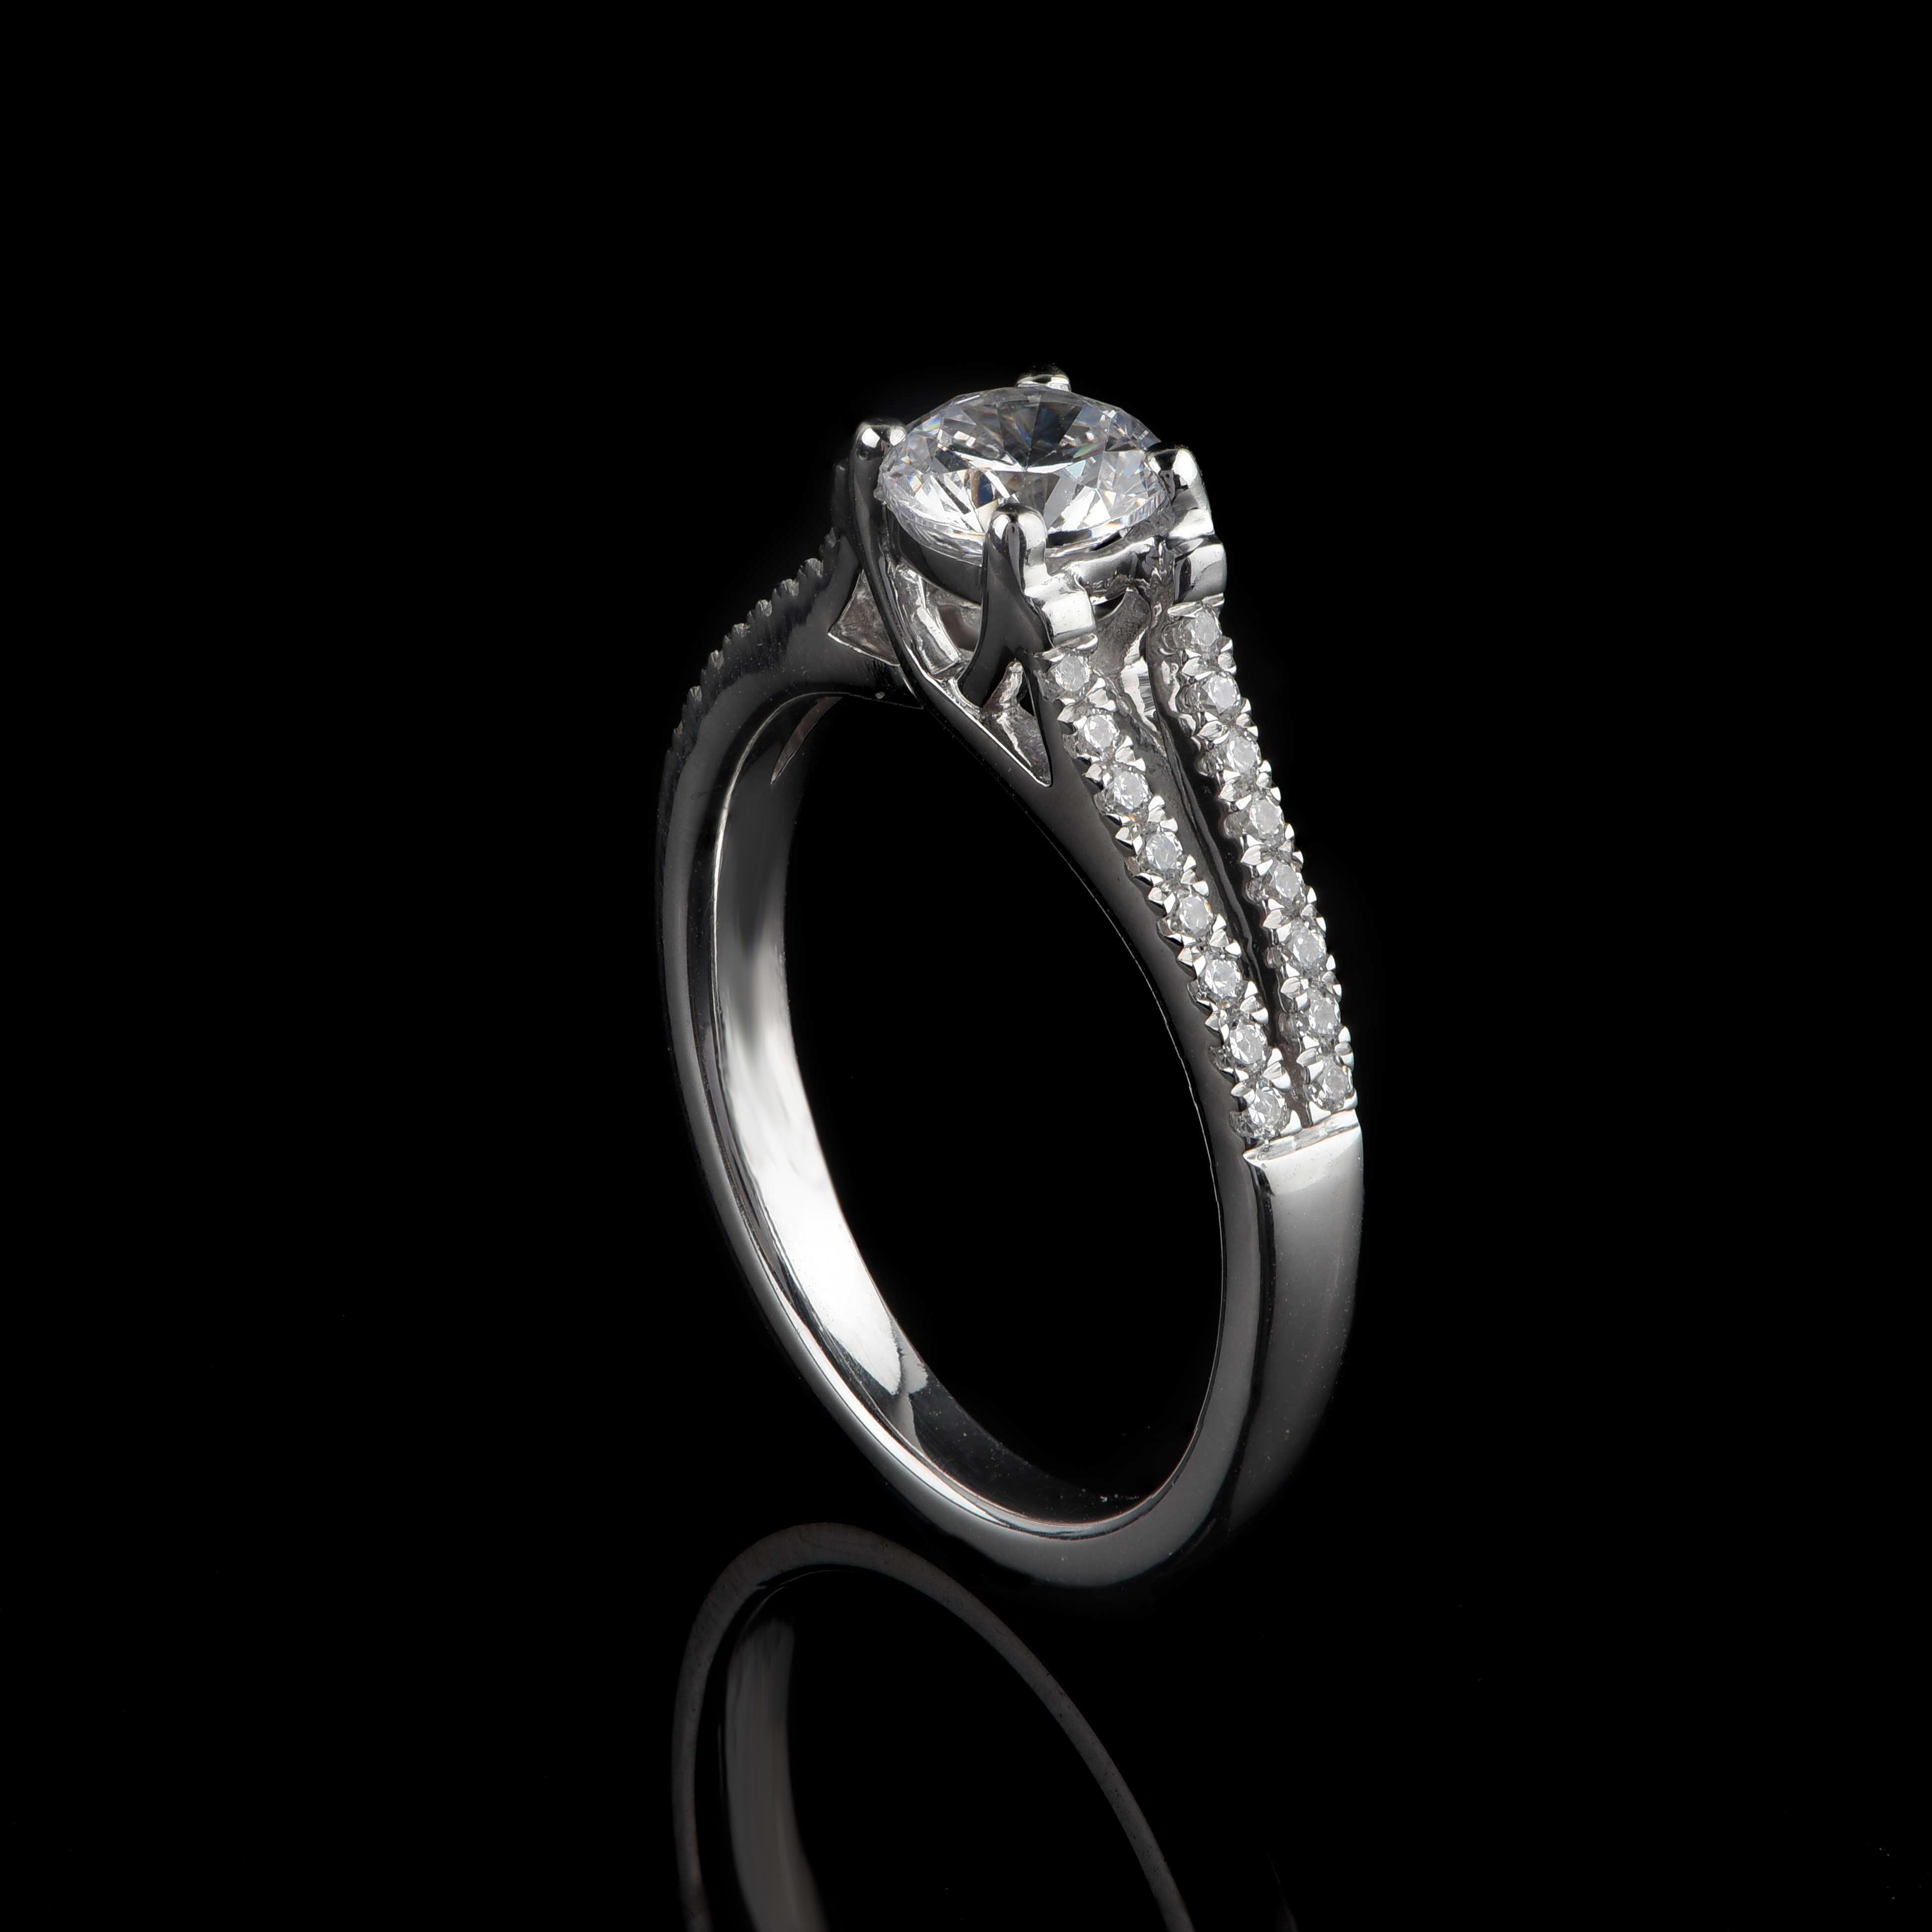 This split shank bridal ring features 32 brilliant-cut diamonds and 1 GIA certified center stone in prong setting. Exquisitely hand-crafted by our skillful craftsmen in 18-karat white gold. The diamonds are graded H Color, SI1 Clarity.   

Metal